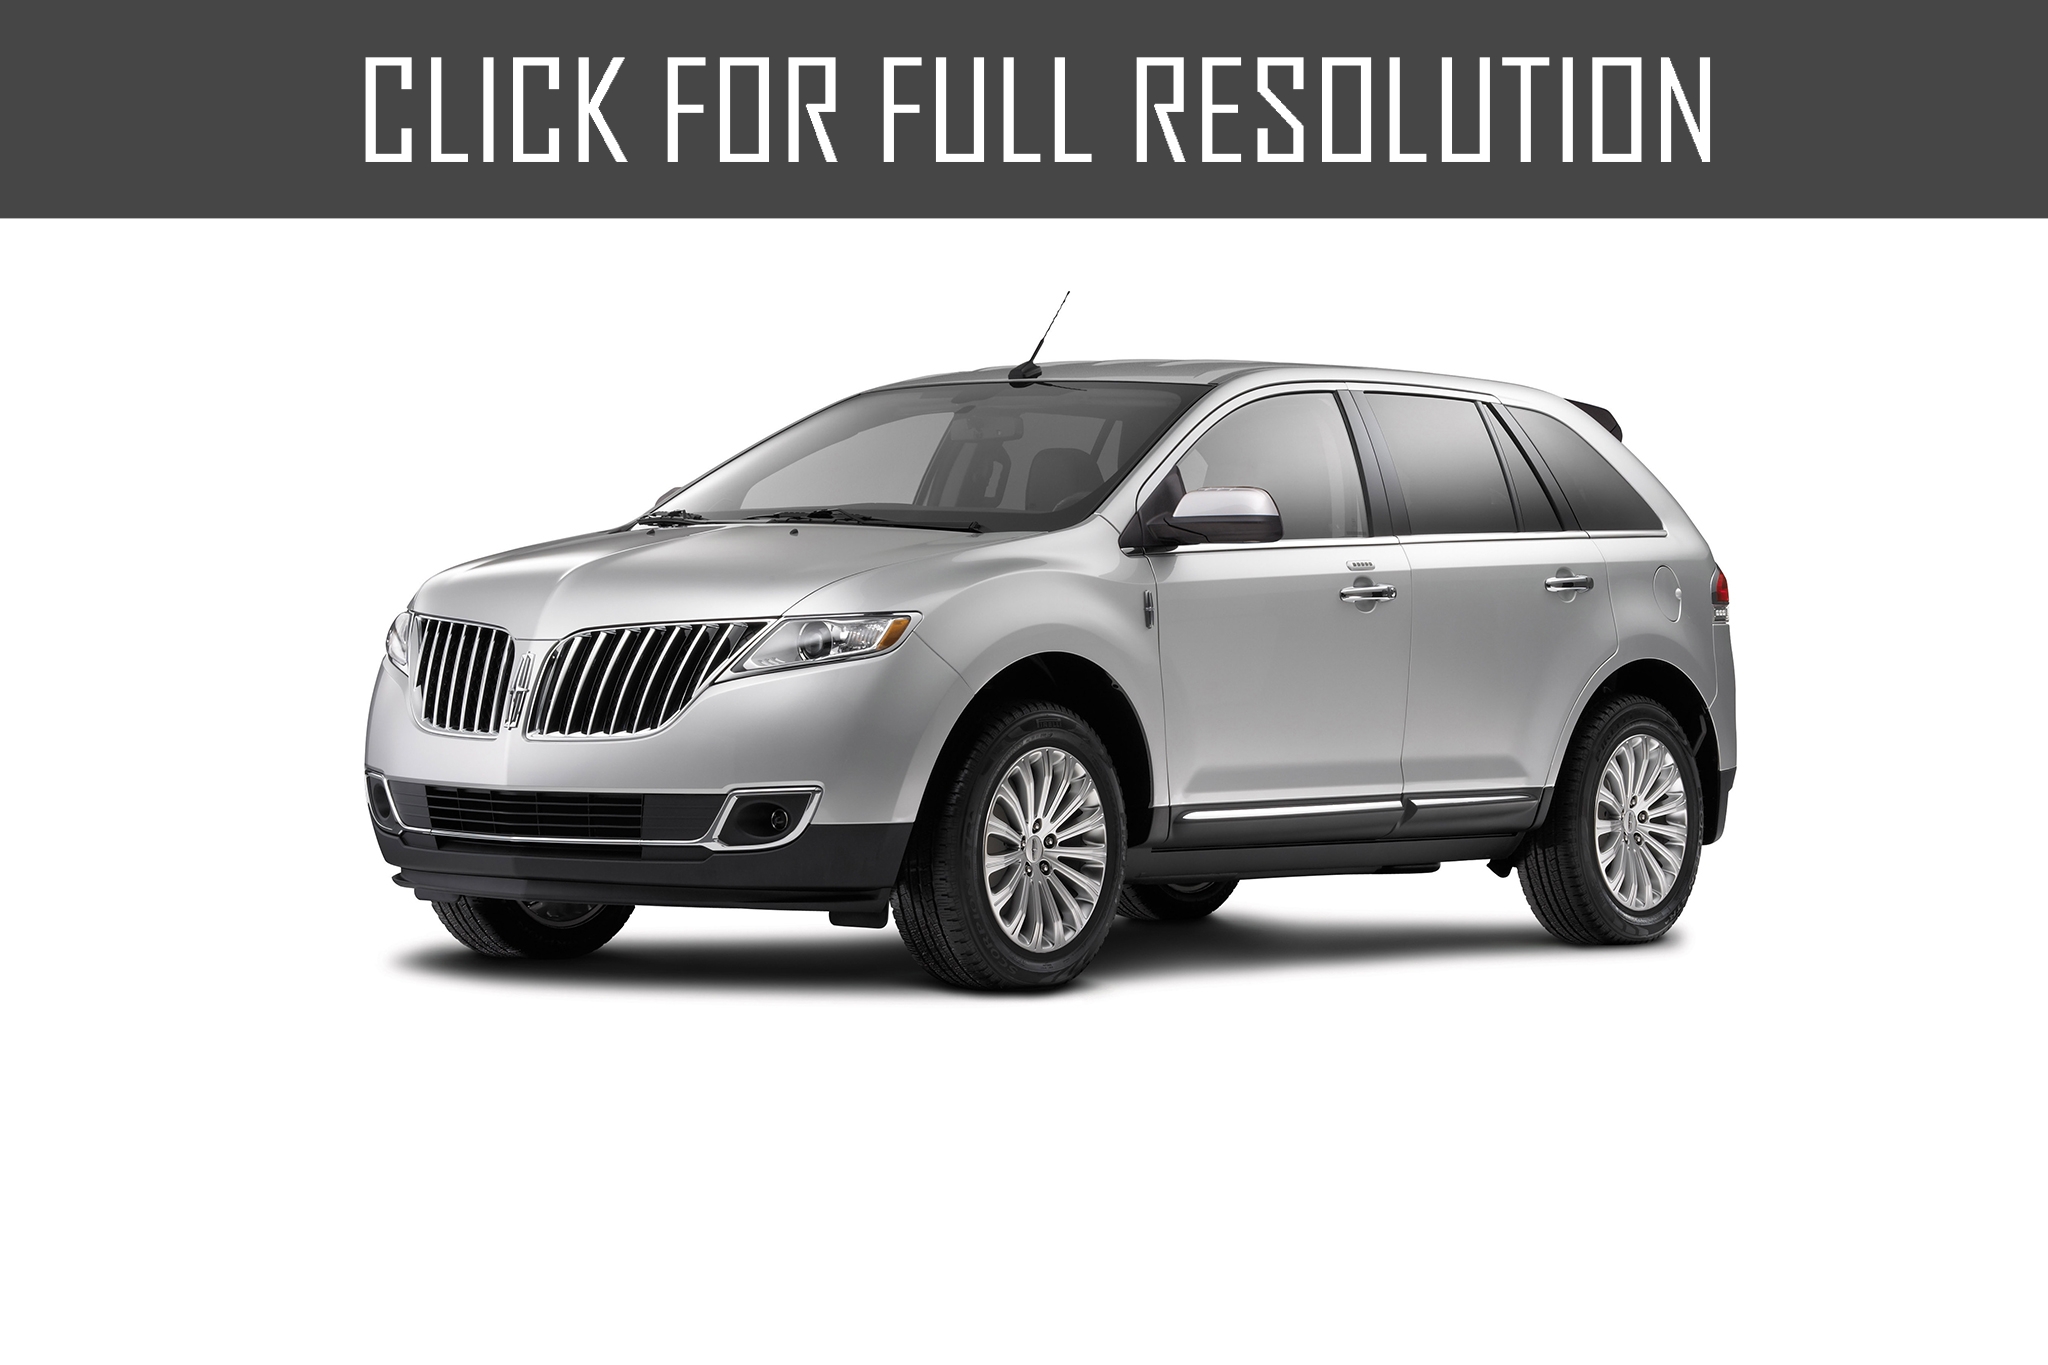 2013 Lincoln Mkx